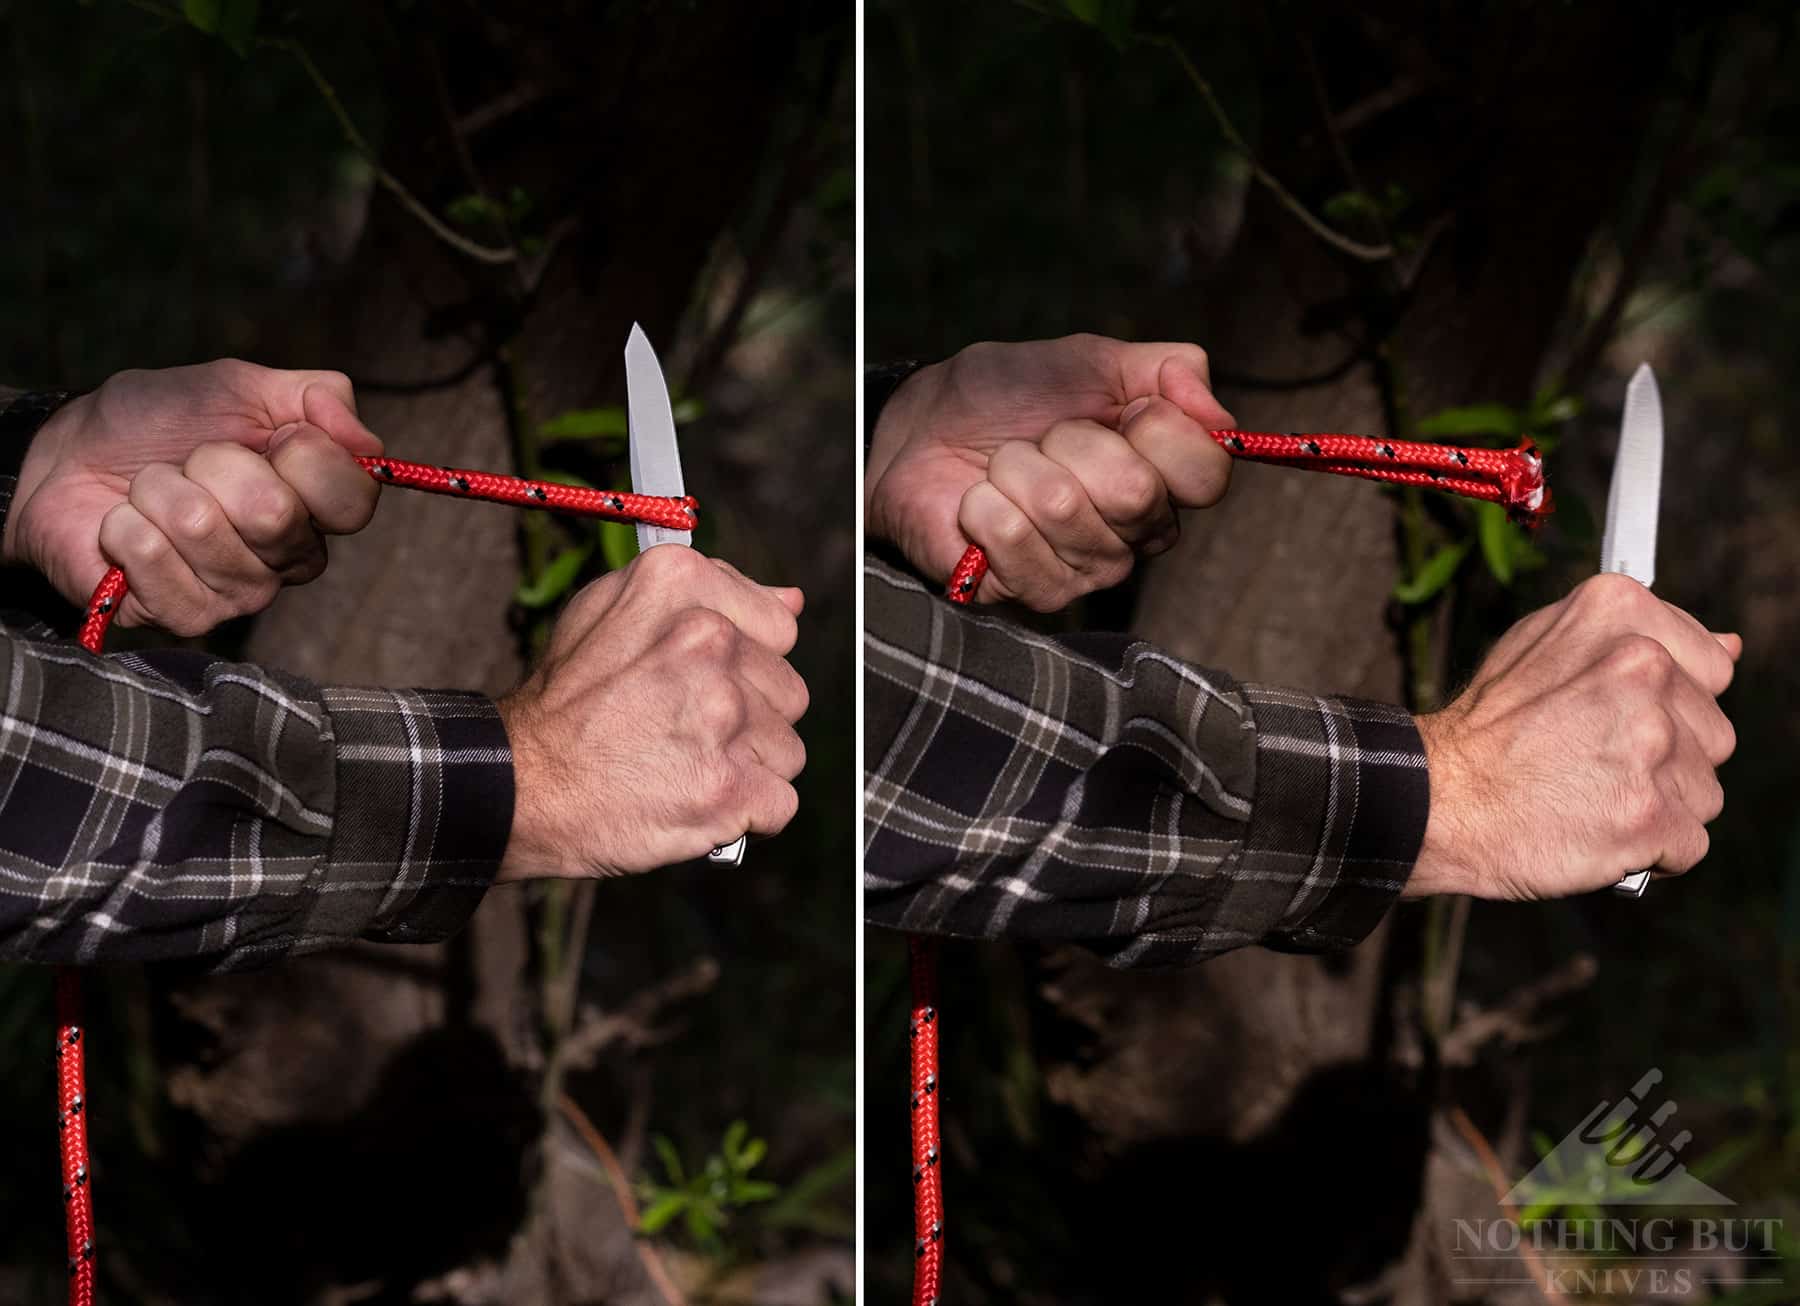 The Facet is a fairly effortless slicer. This two image collage show a before and after of a rope being cut.